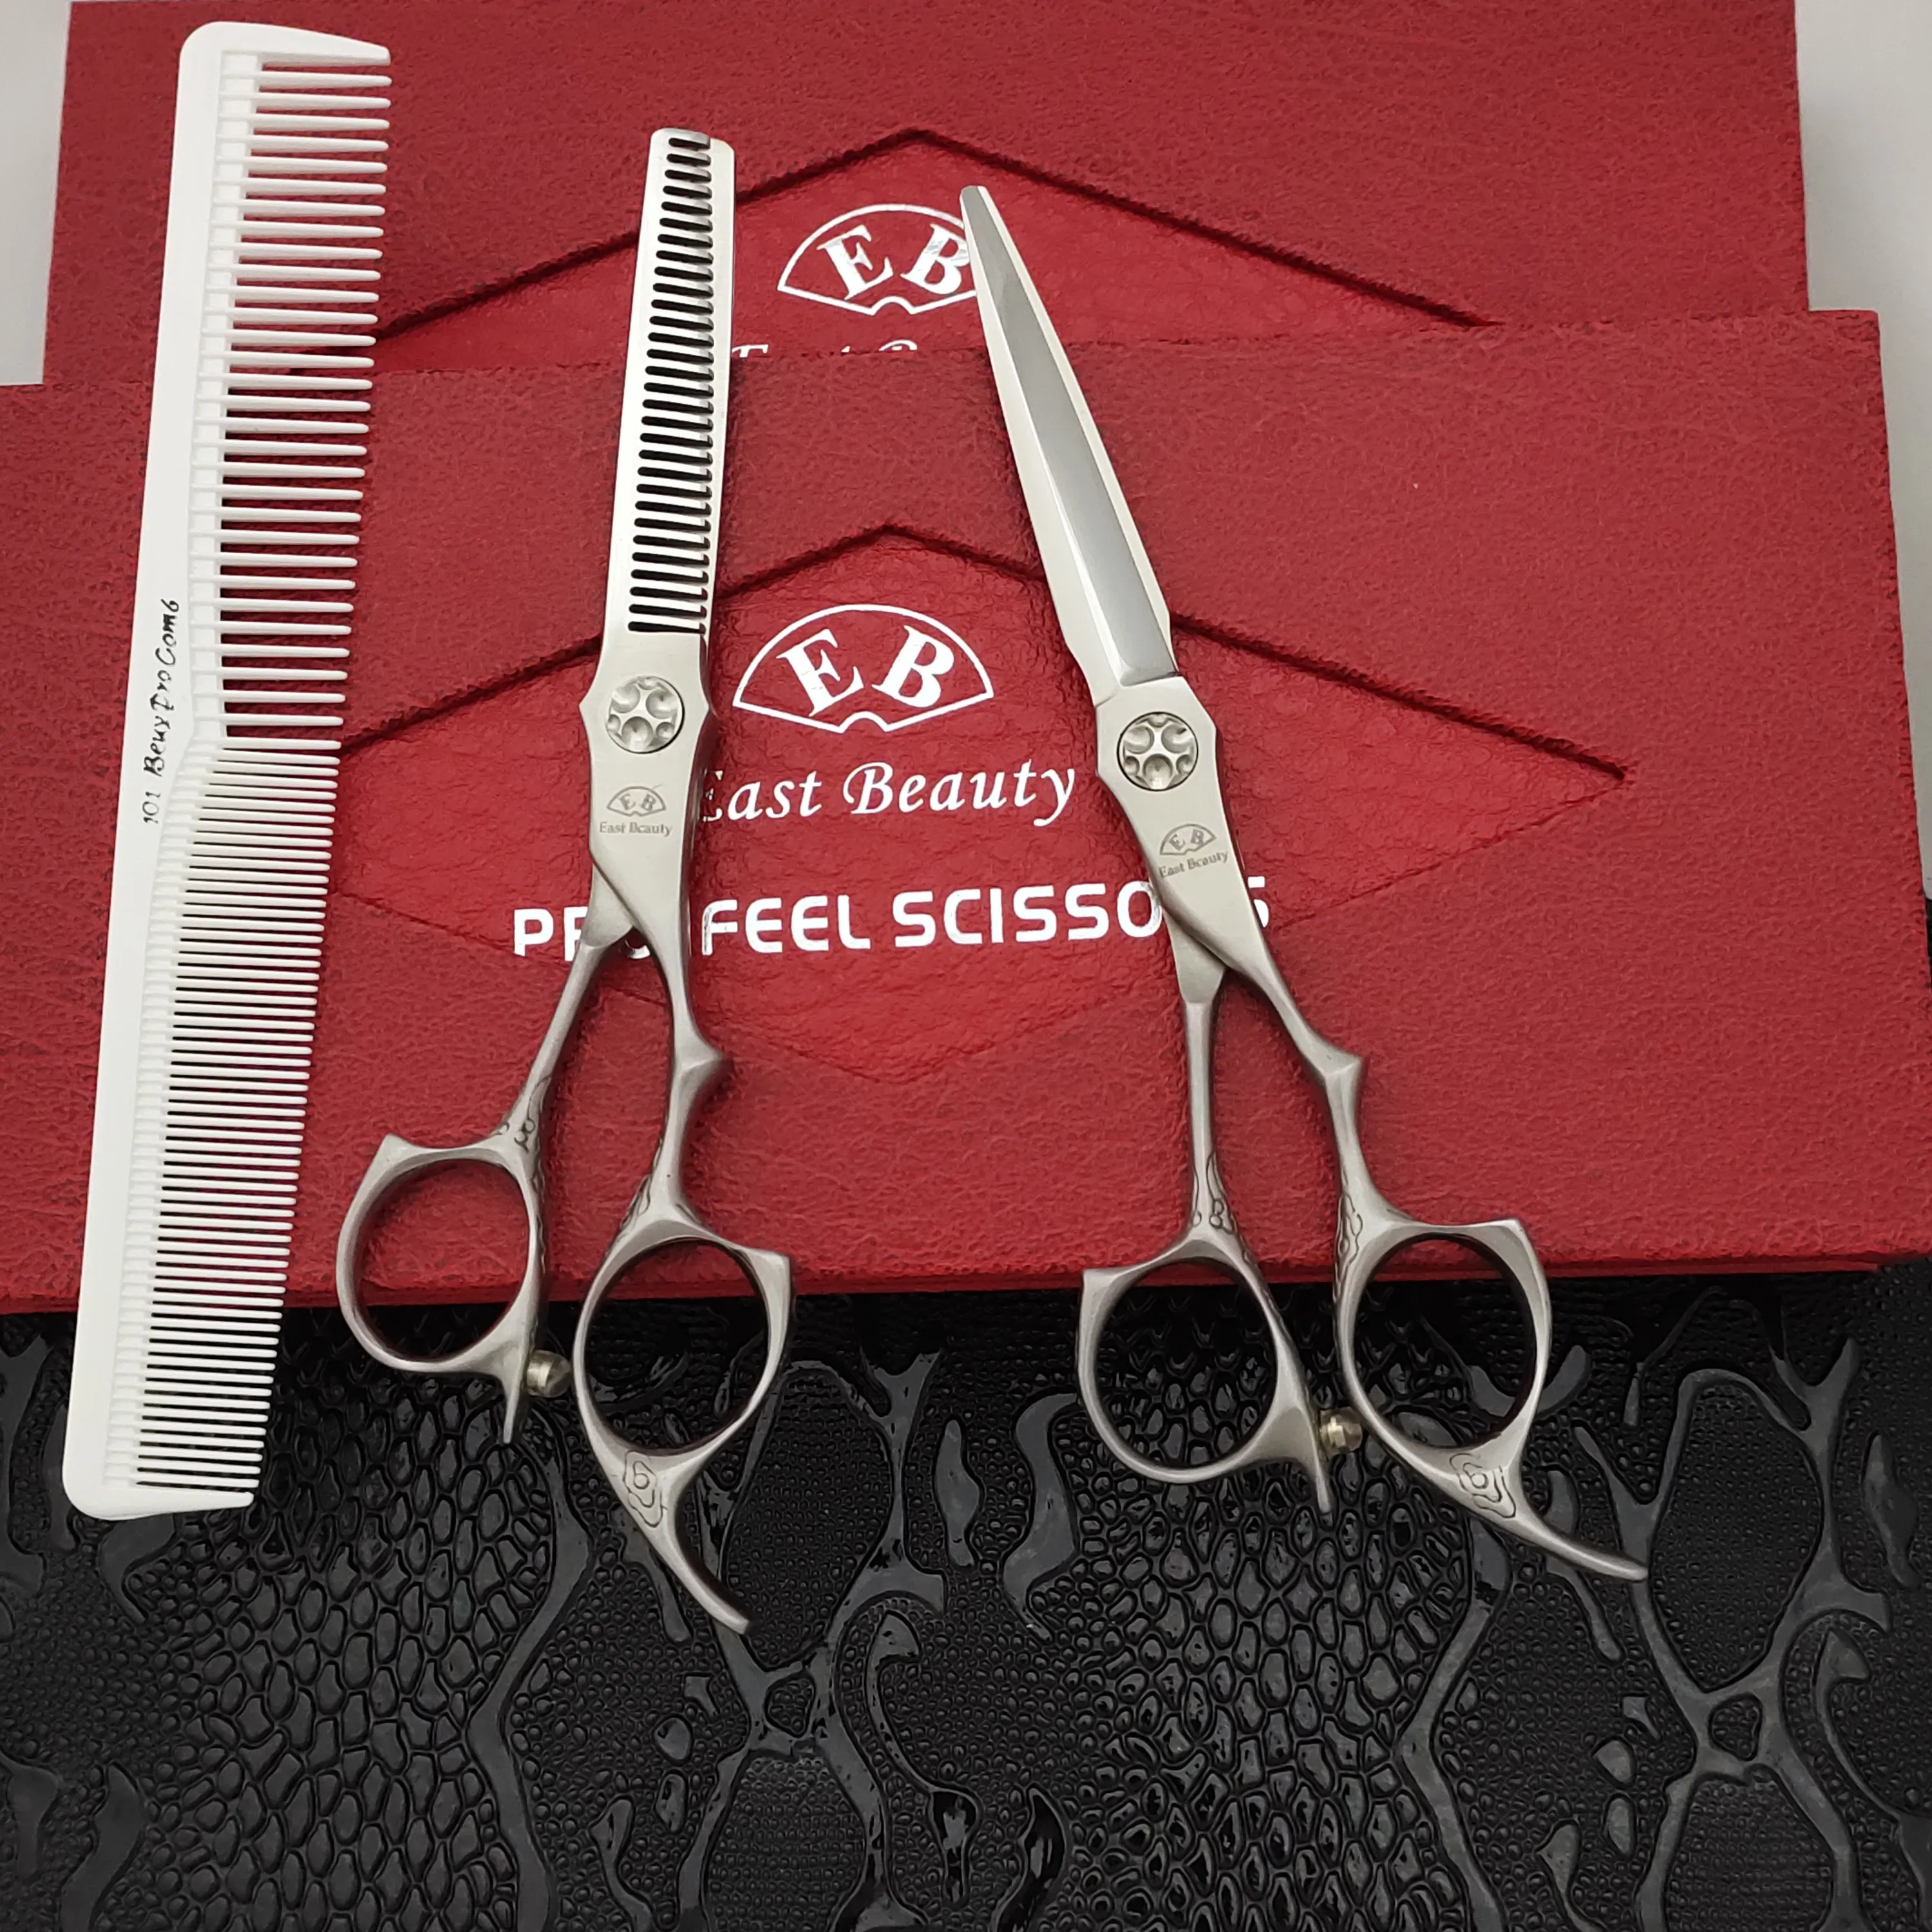 

Professional Hair Cutting Scissors Kits Stainless Steel Hairdressing Shears Set Thinning/Texturizing Scissors for Barber Salon, Silver